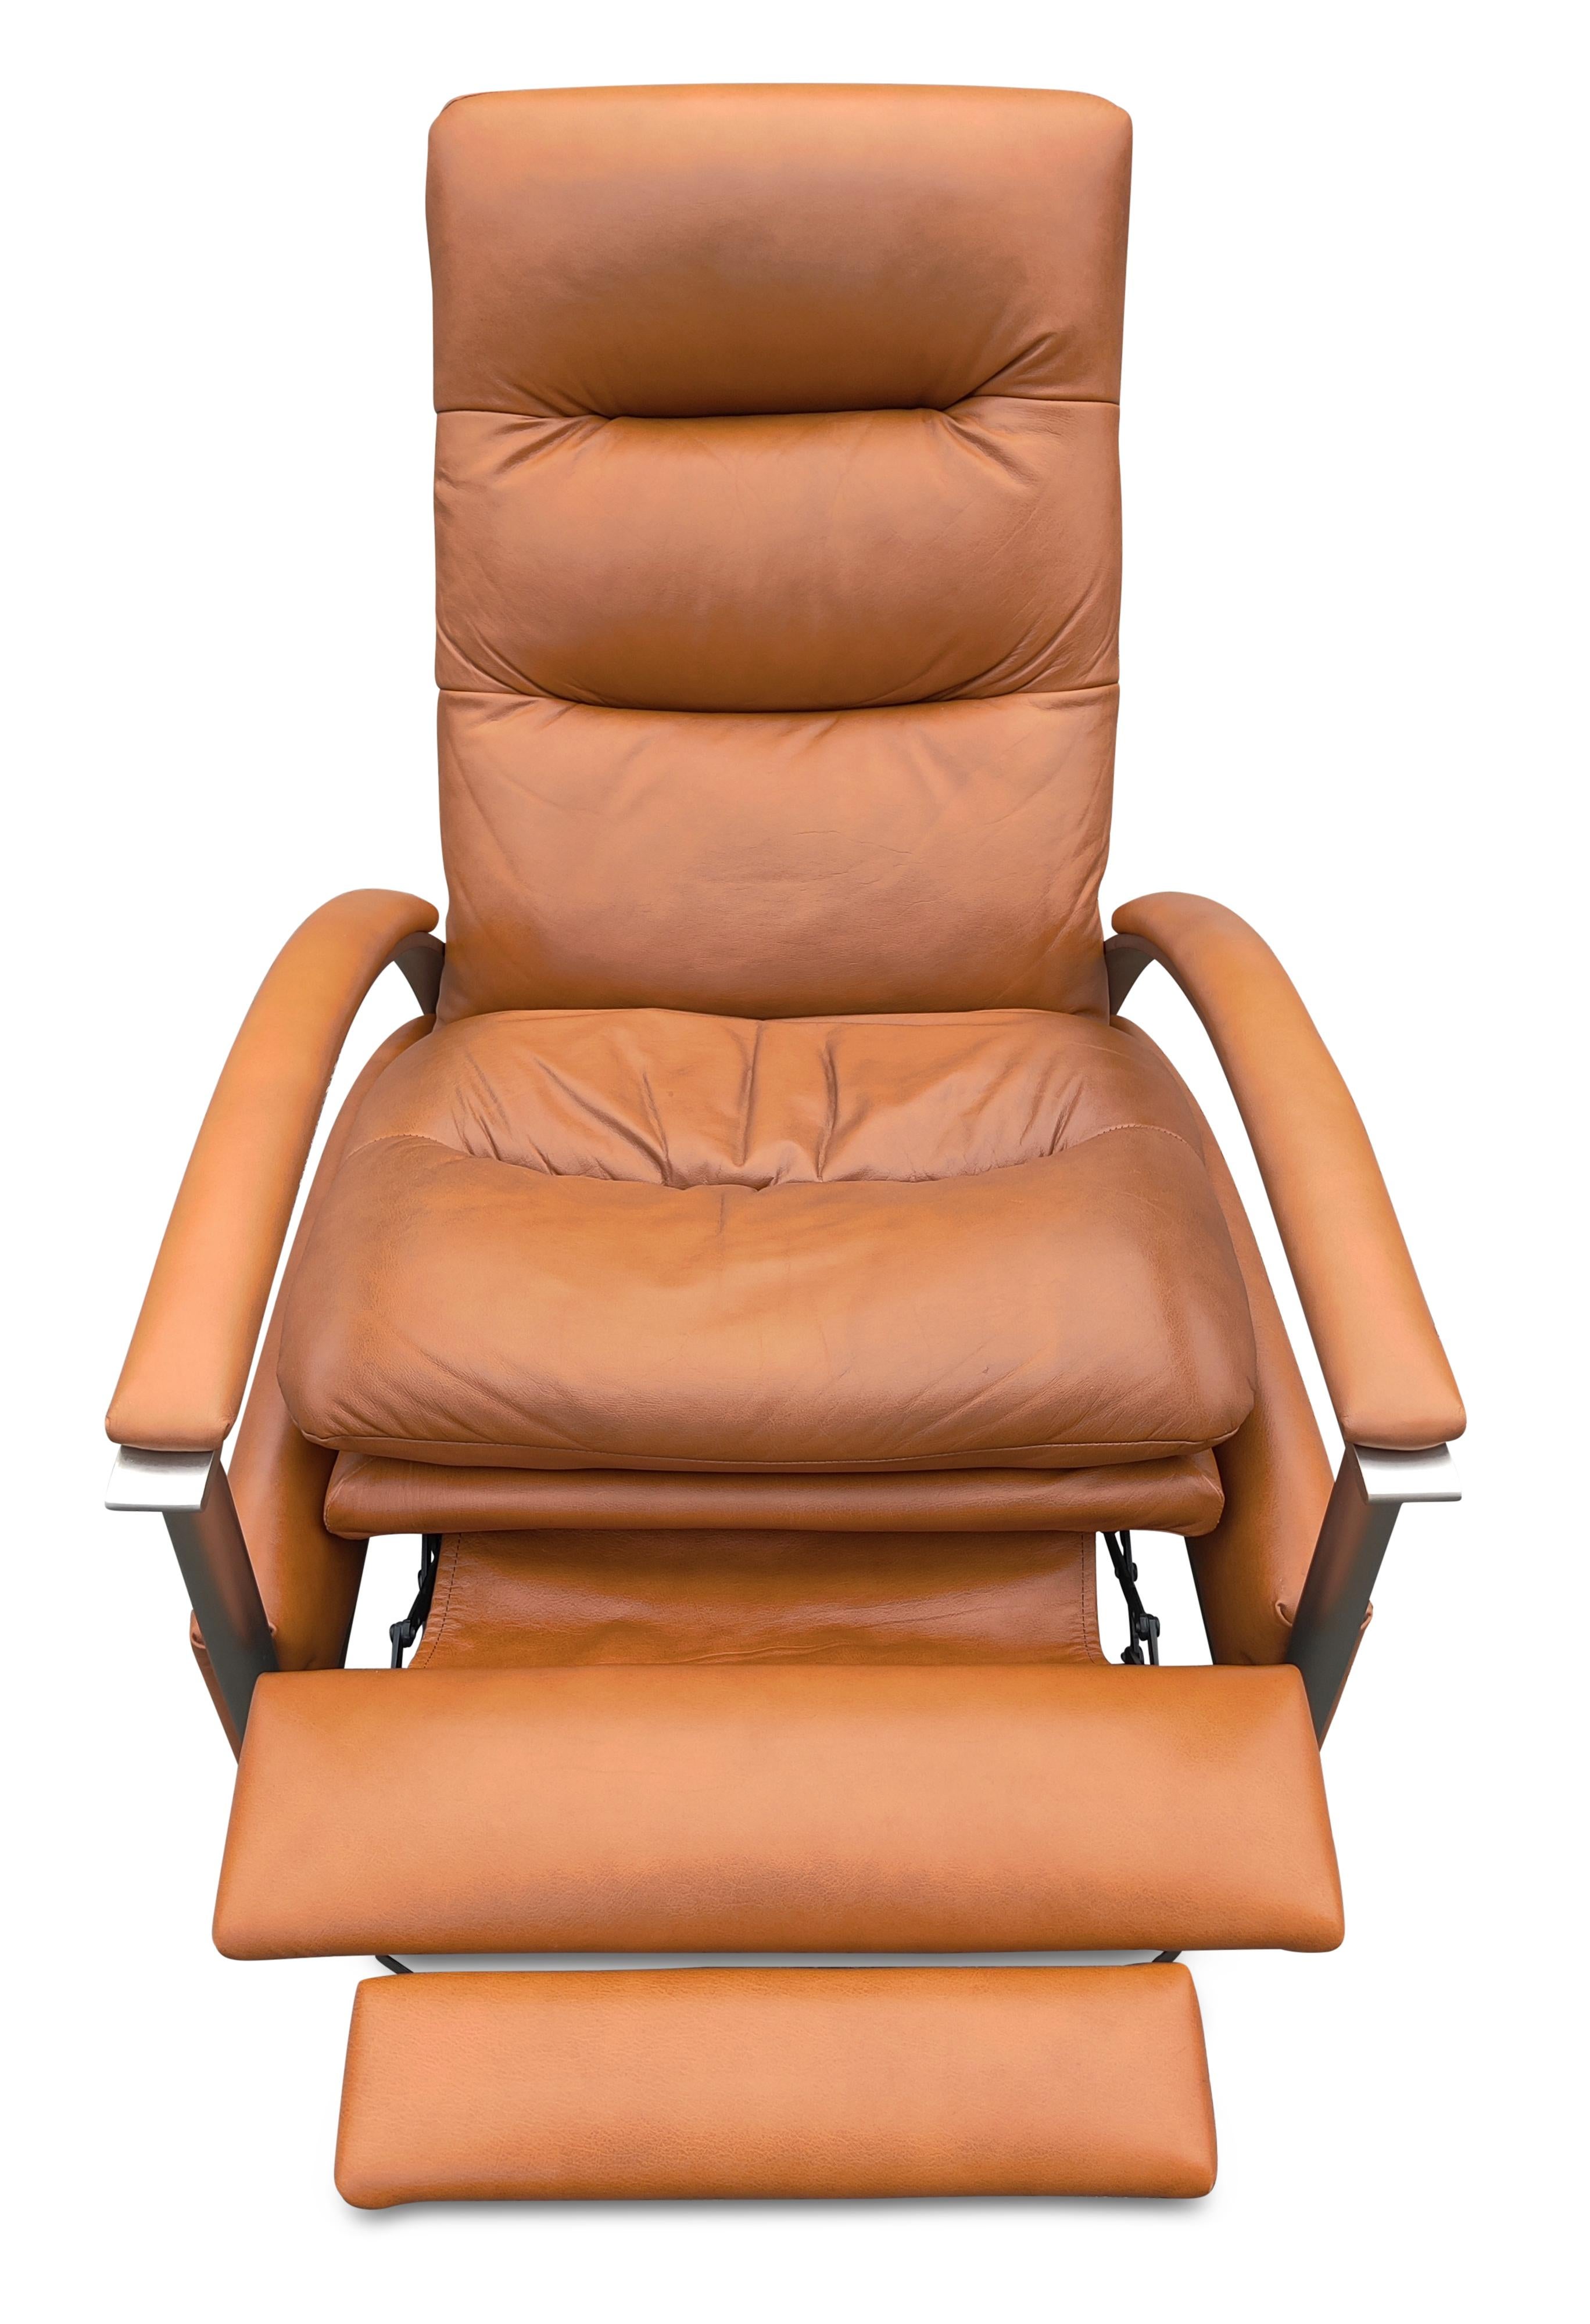 American Milo Baughman Style Pair Orange Leather and Steel Recliners or Lounge Chairs